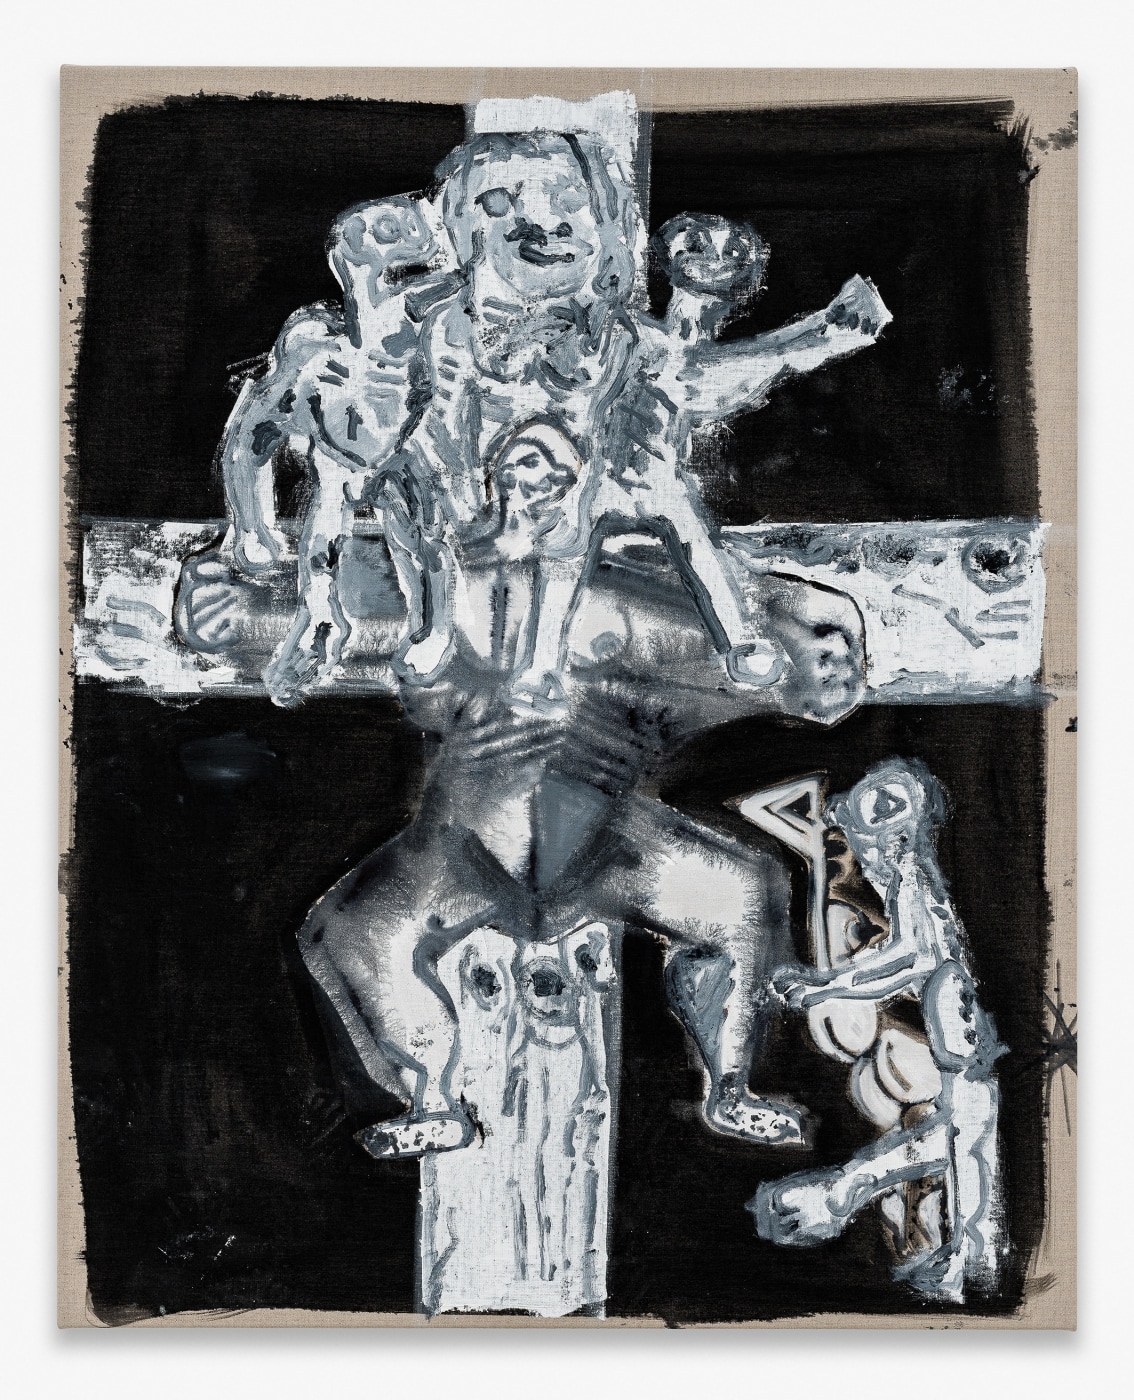 Untitled (Crucifixion),&amp;nbsp;2020
Mixed media on canvas, 114.5 x 92.5 x 3 cm / 45 1/8 x 36 3/8 x 1 1/8 in